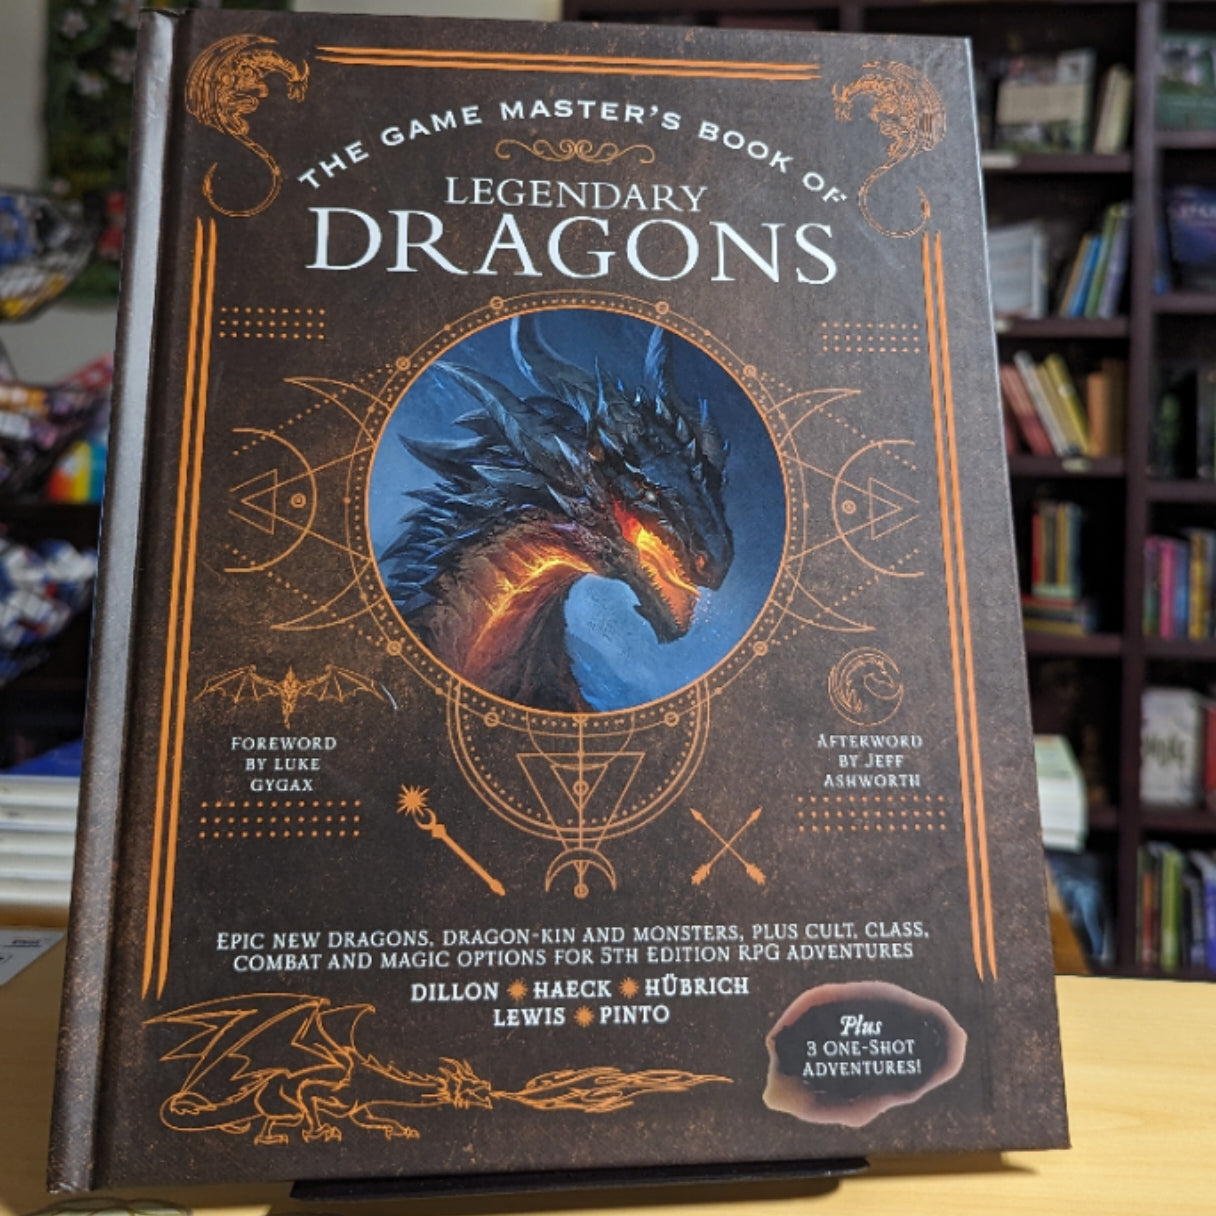 The Game Master's Book of Legendary Dragons: Epic new dragons, dragon-kin and monsters, plus dragon cults, classes, combat and magic for 5th Edition RPG adventures (The Game Master Series)